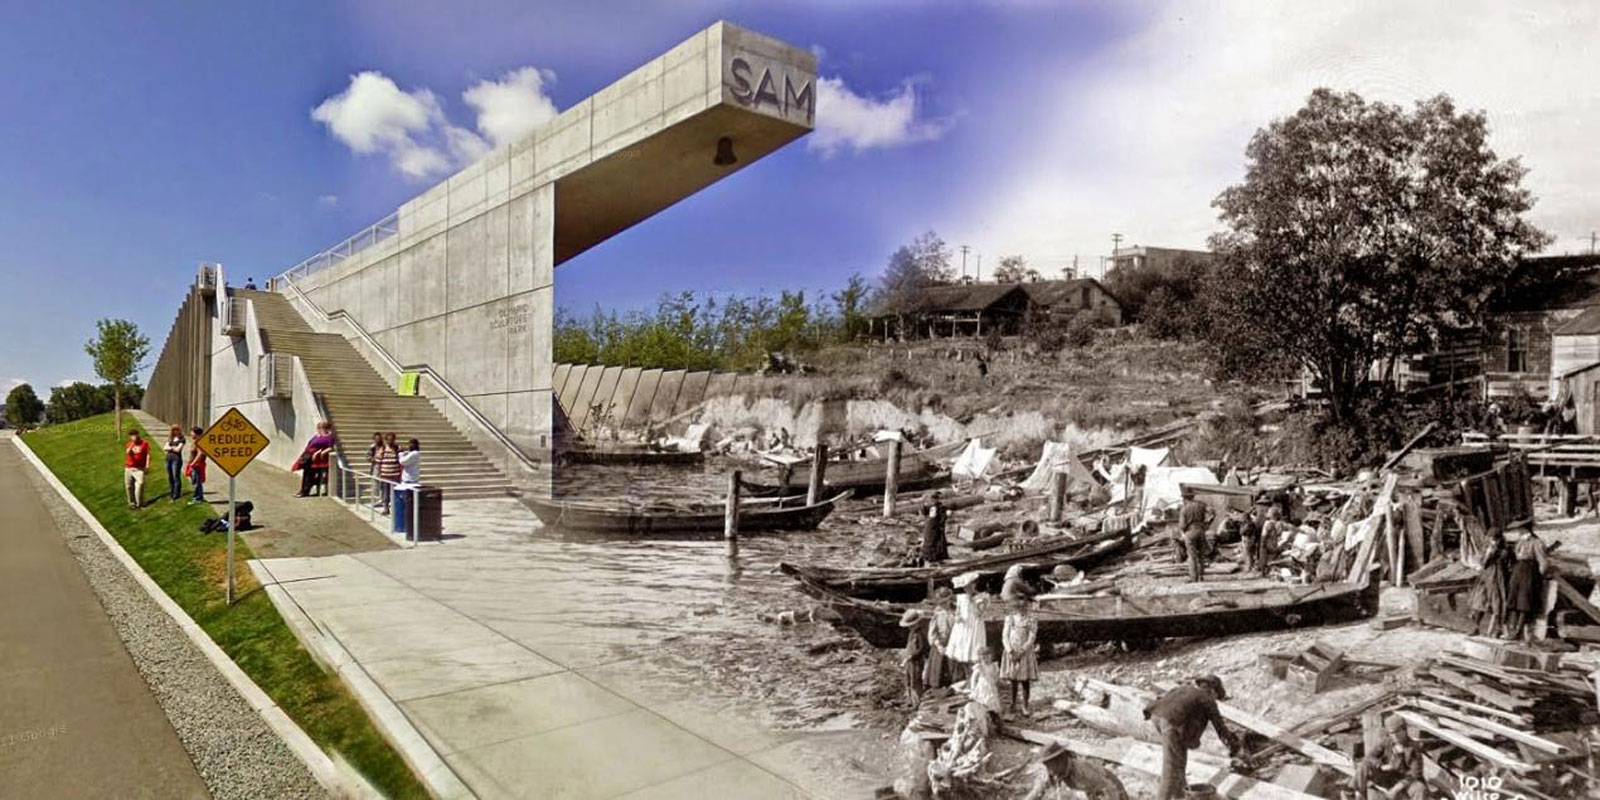 A overlay comparison photo of the SAM Olympic Sculpture Park and an Indian Summer Laborers Camp 